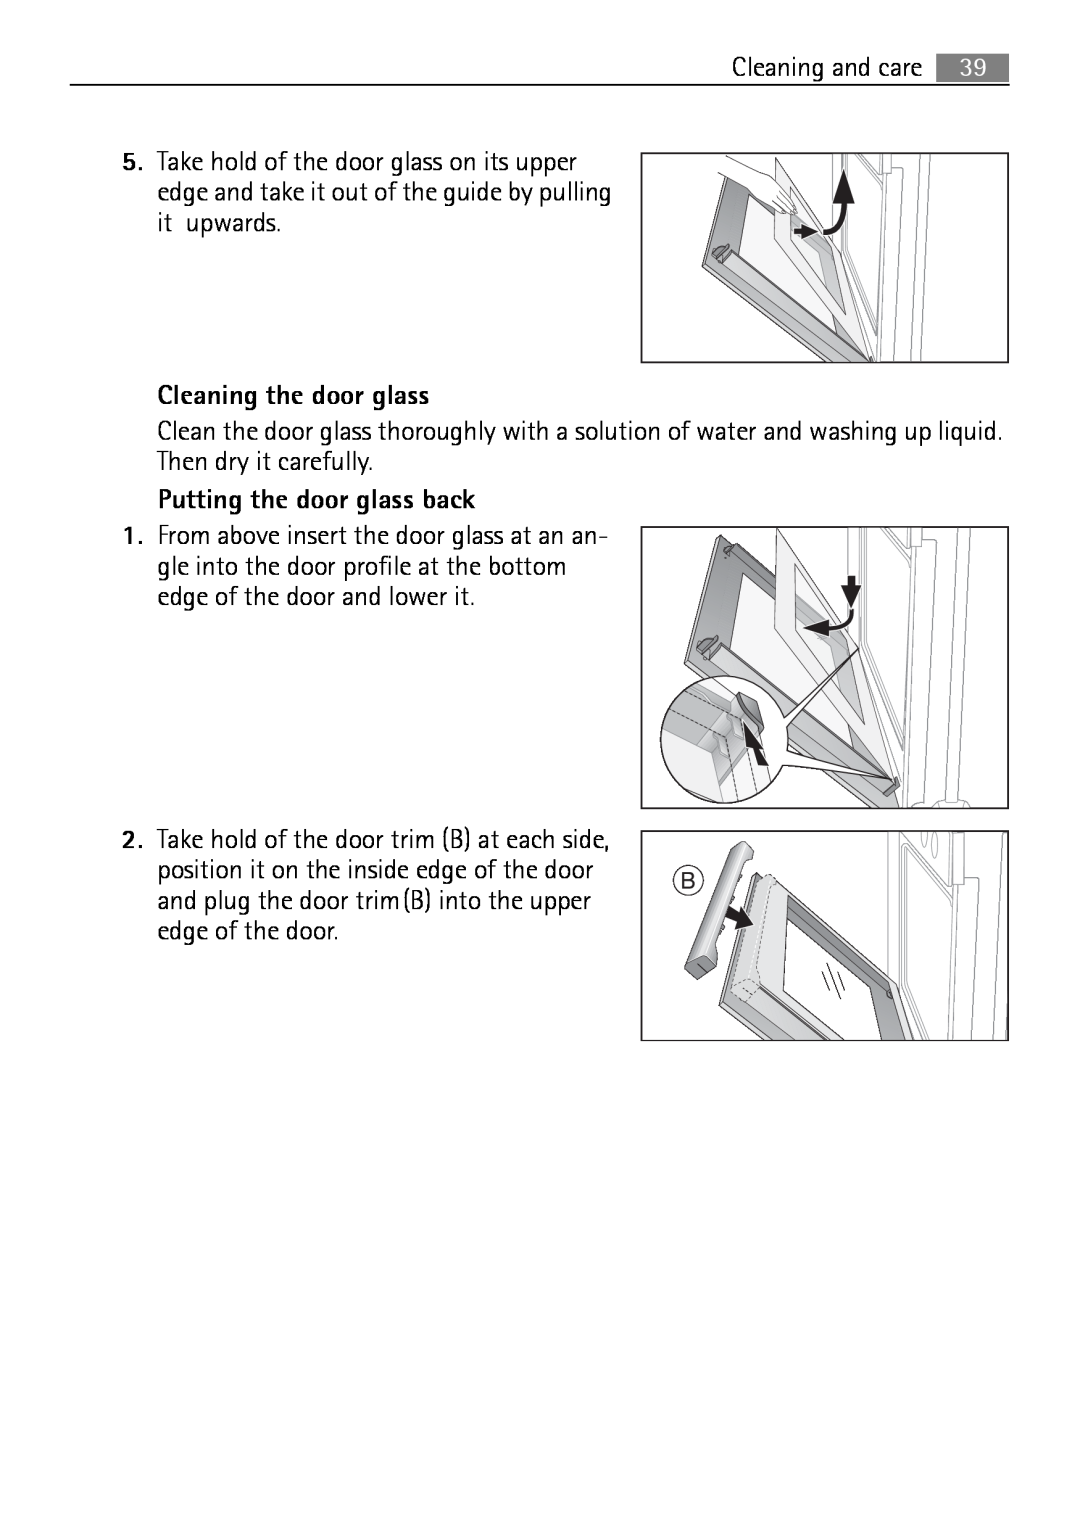 Electrolux B2100-5 user manual Cleaning the door glass, Putting the door glass back 